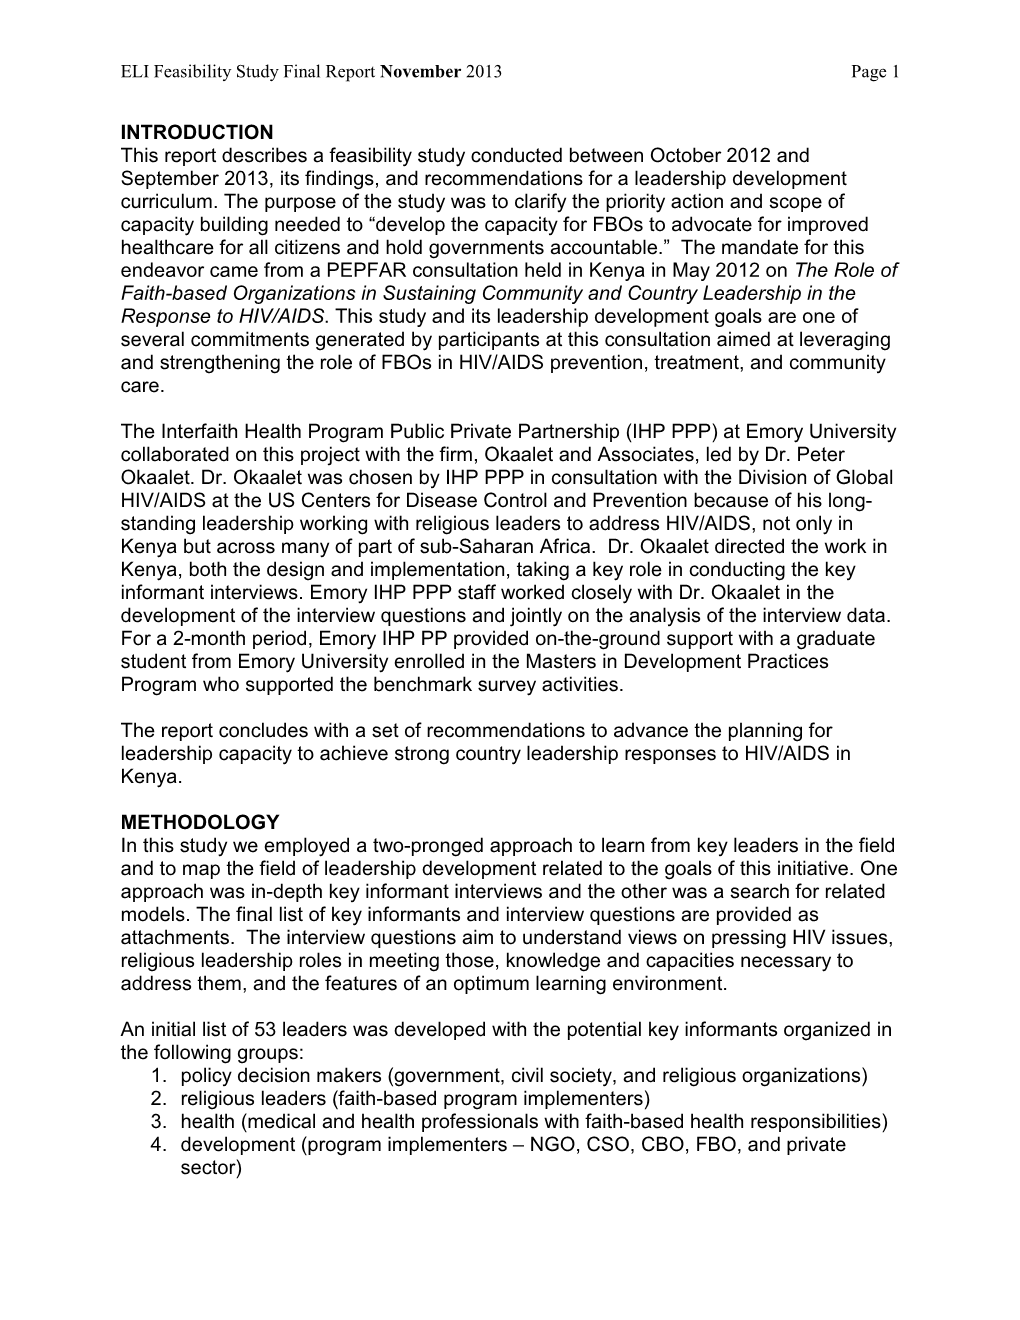 INTRODUCTION This Report Describes a Feasibility Study Conducted Between October 2012 and September 2013, Its Findings, and Reco